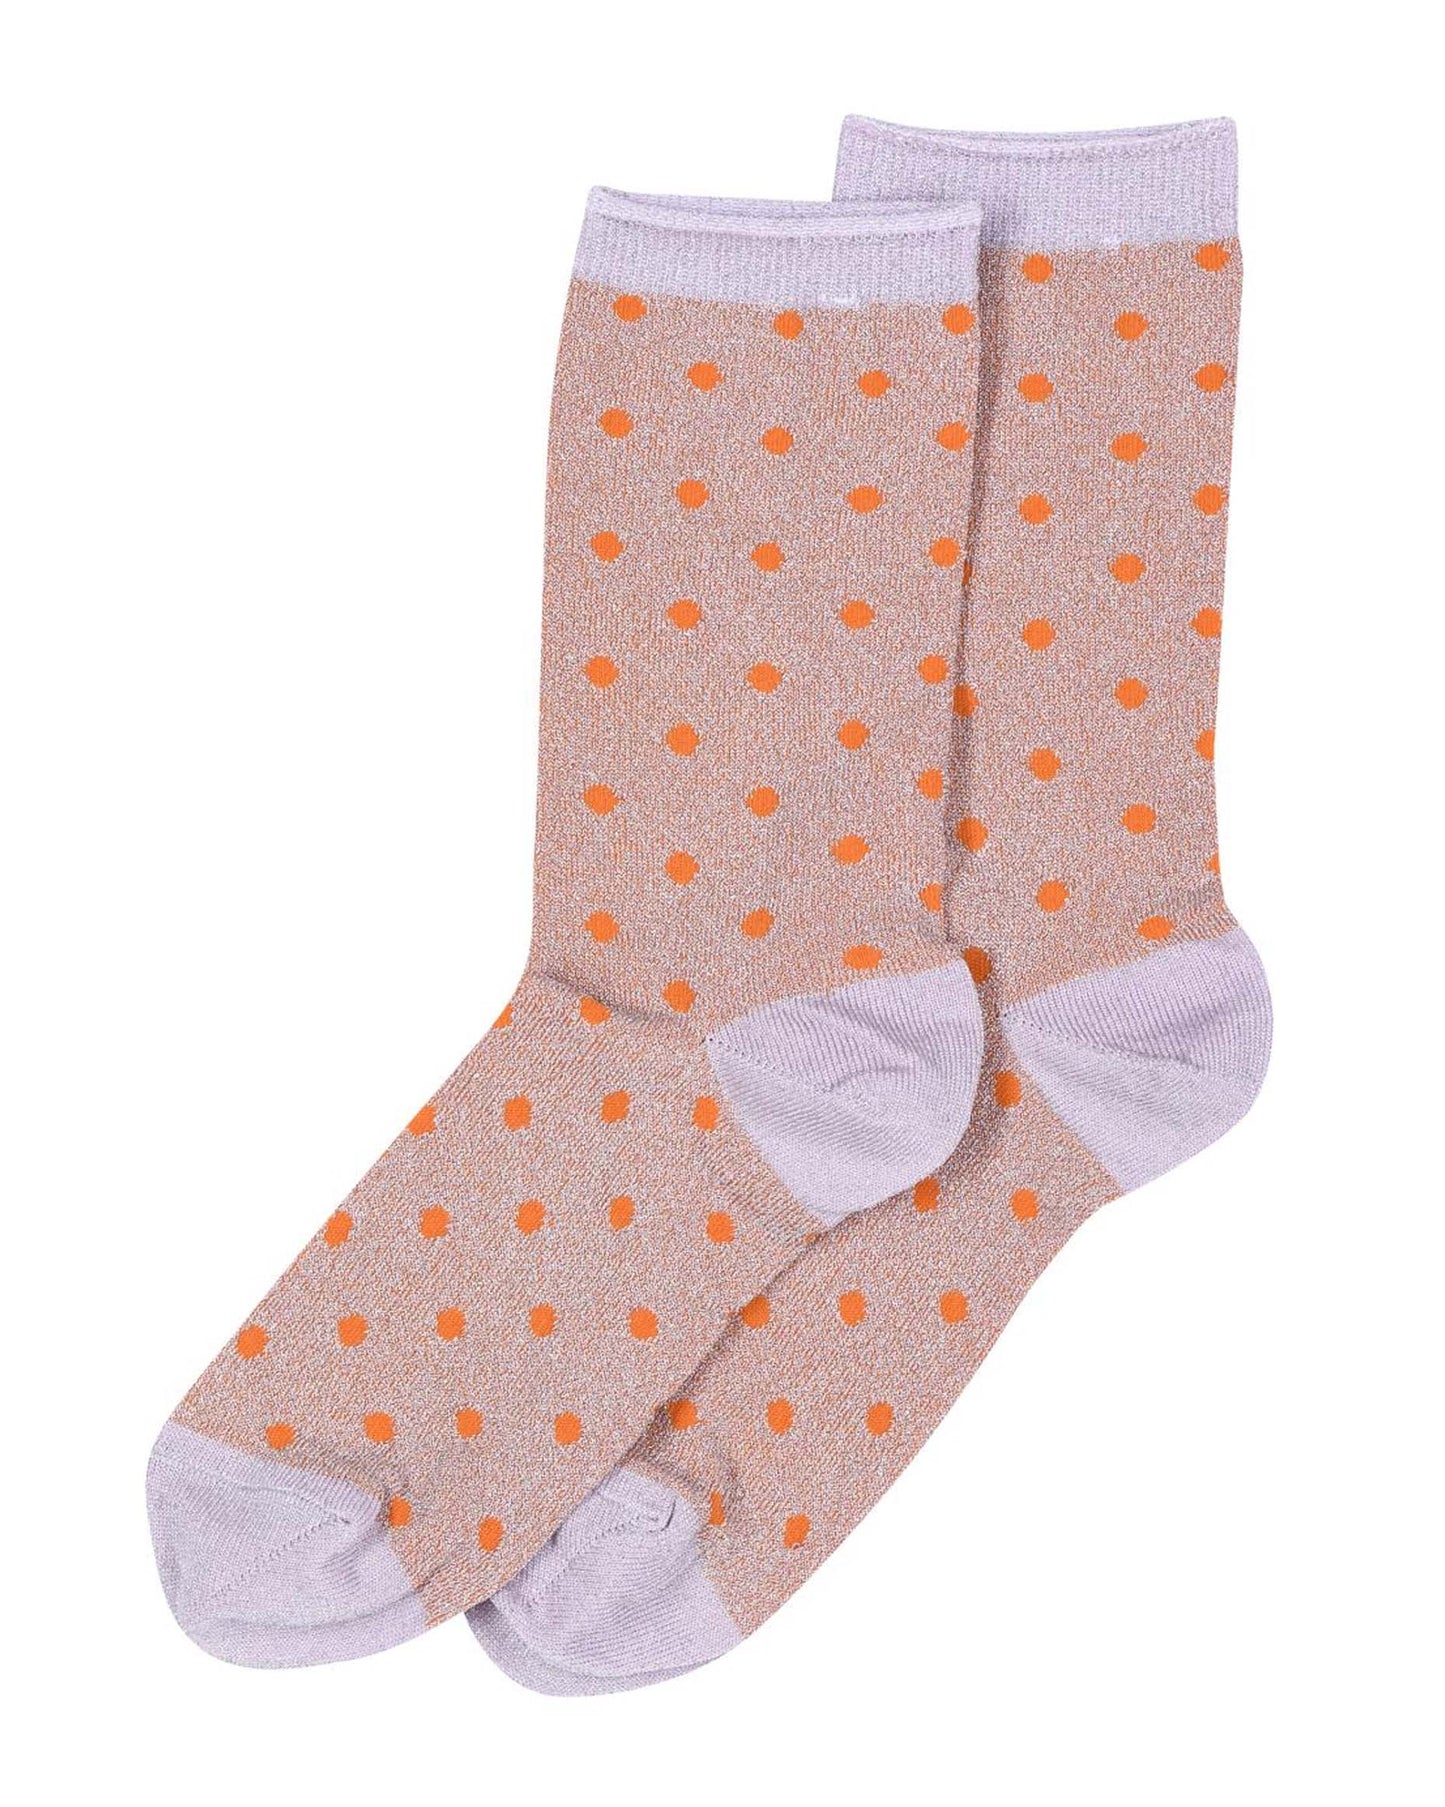 MP Denmark Donna Glitter Socks - Light pale orange sparkly lamé fashion ankle socks with an all over orange polka dot pattern with lilac cuff, heal and toe.